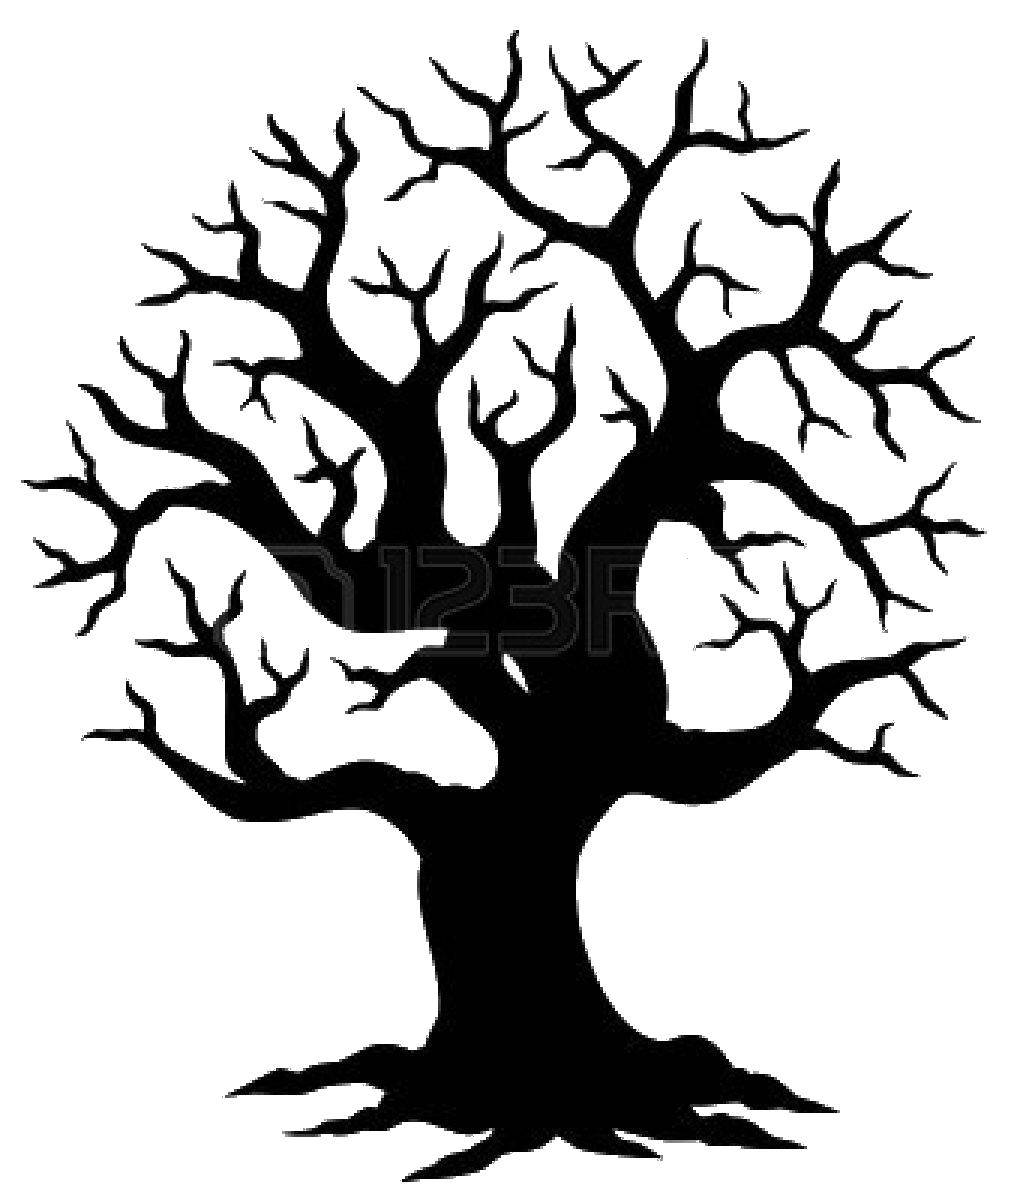 Coloring Scary tree. Category The contour of the tree. Tags:  tree.